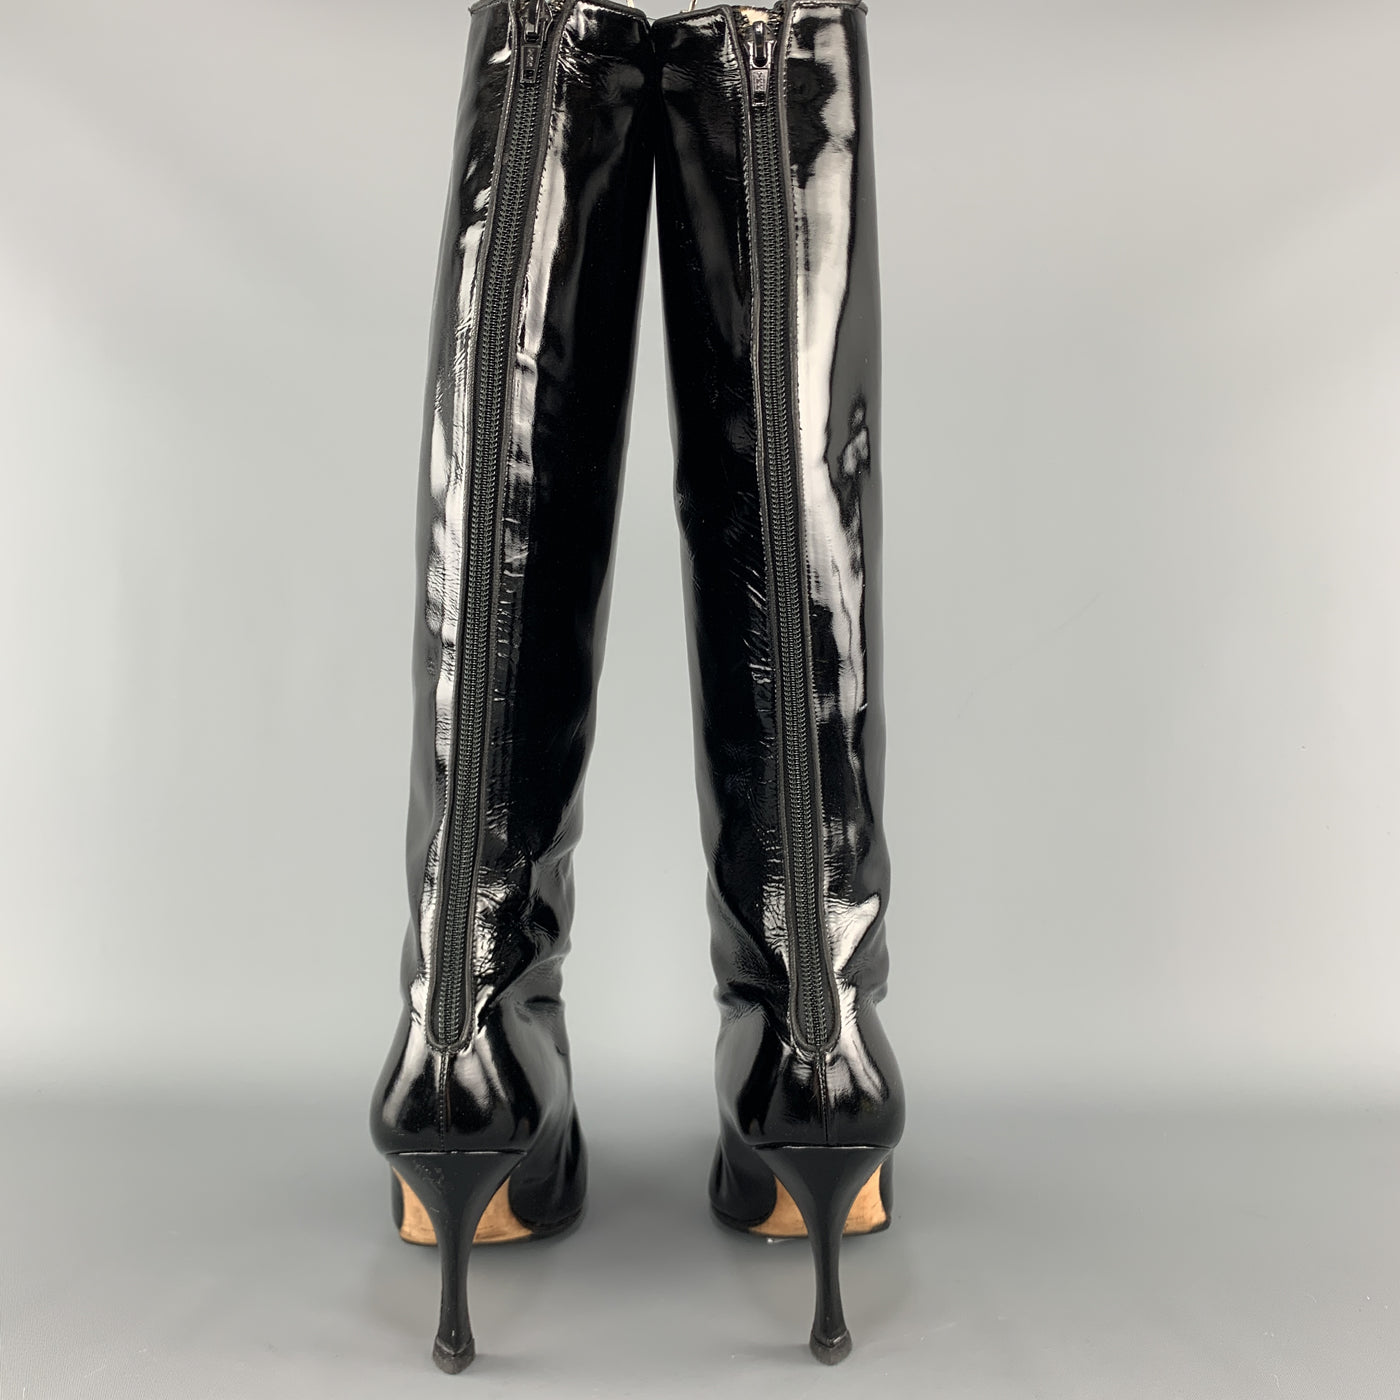 MANOLO BLAHNIK Size 8 Black Patent Leather Pointed Knee High Boots